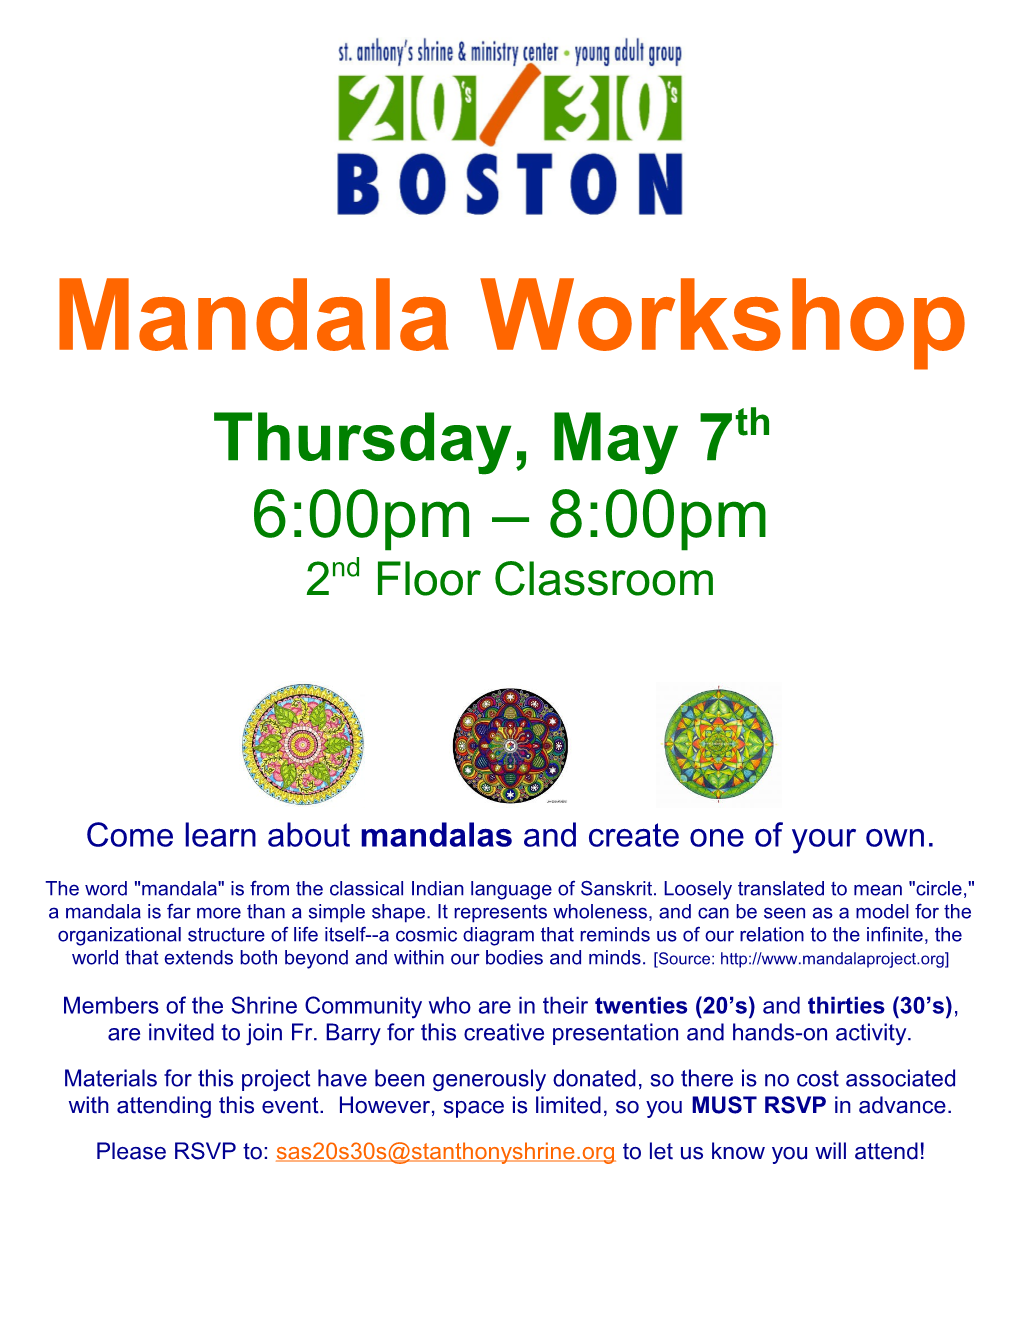 Come Learn About Mandalas and Create One of Your Own